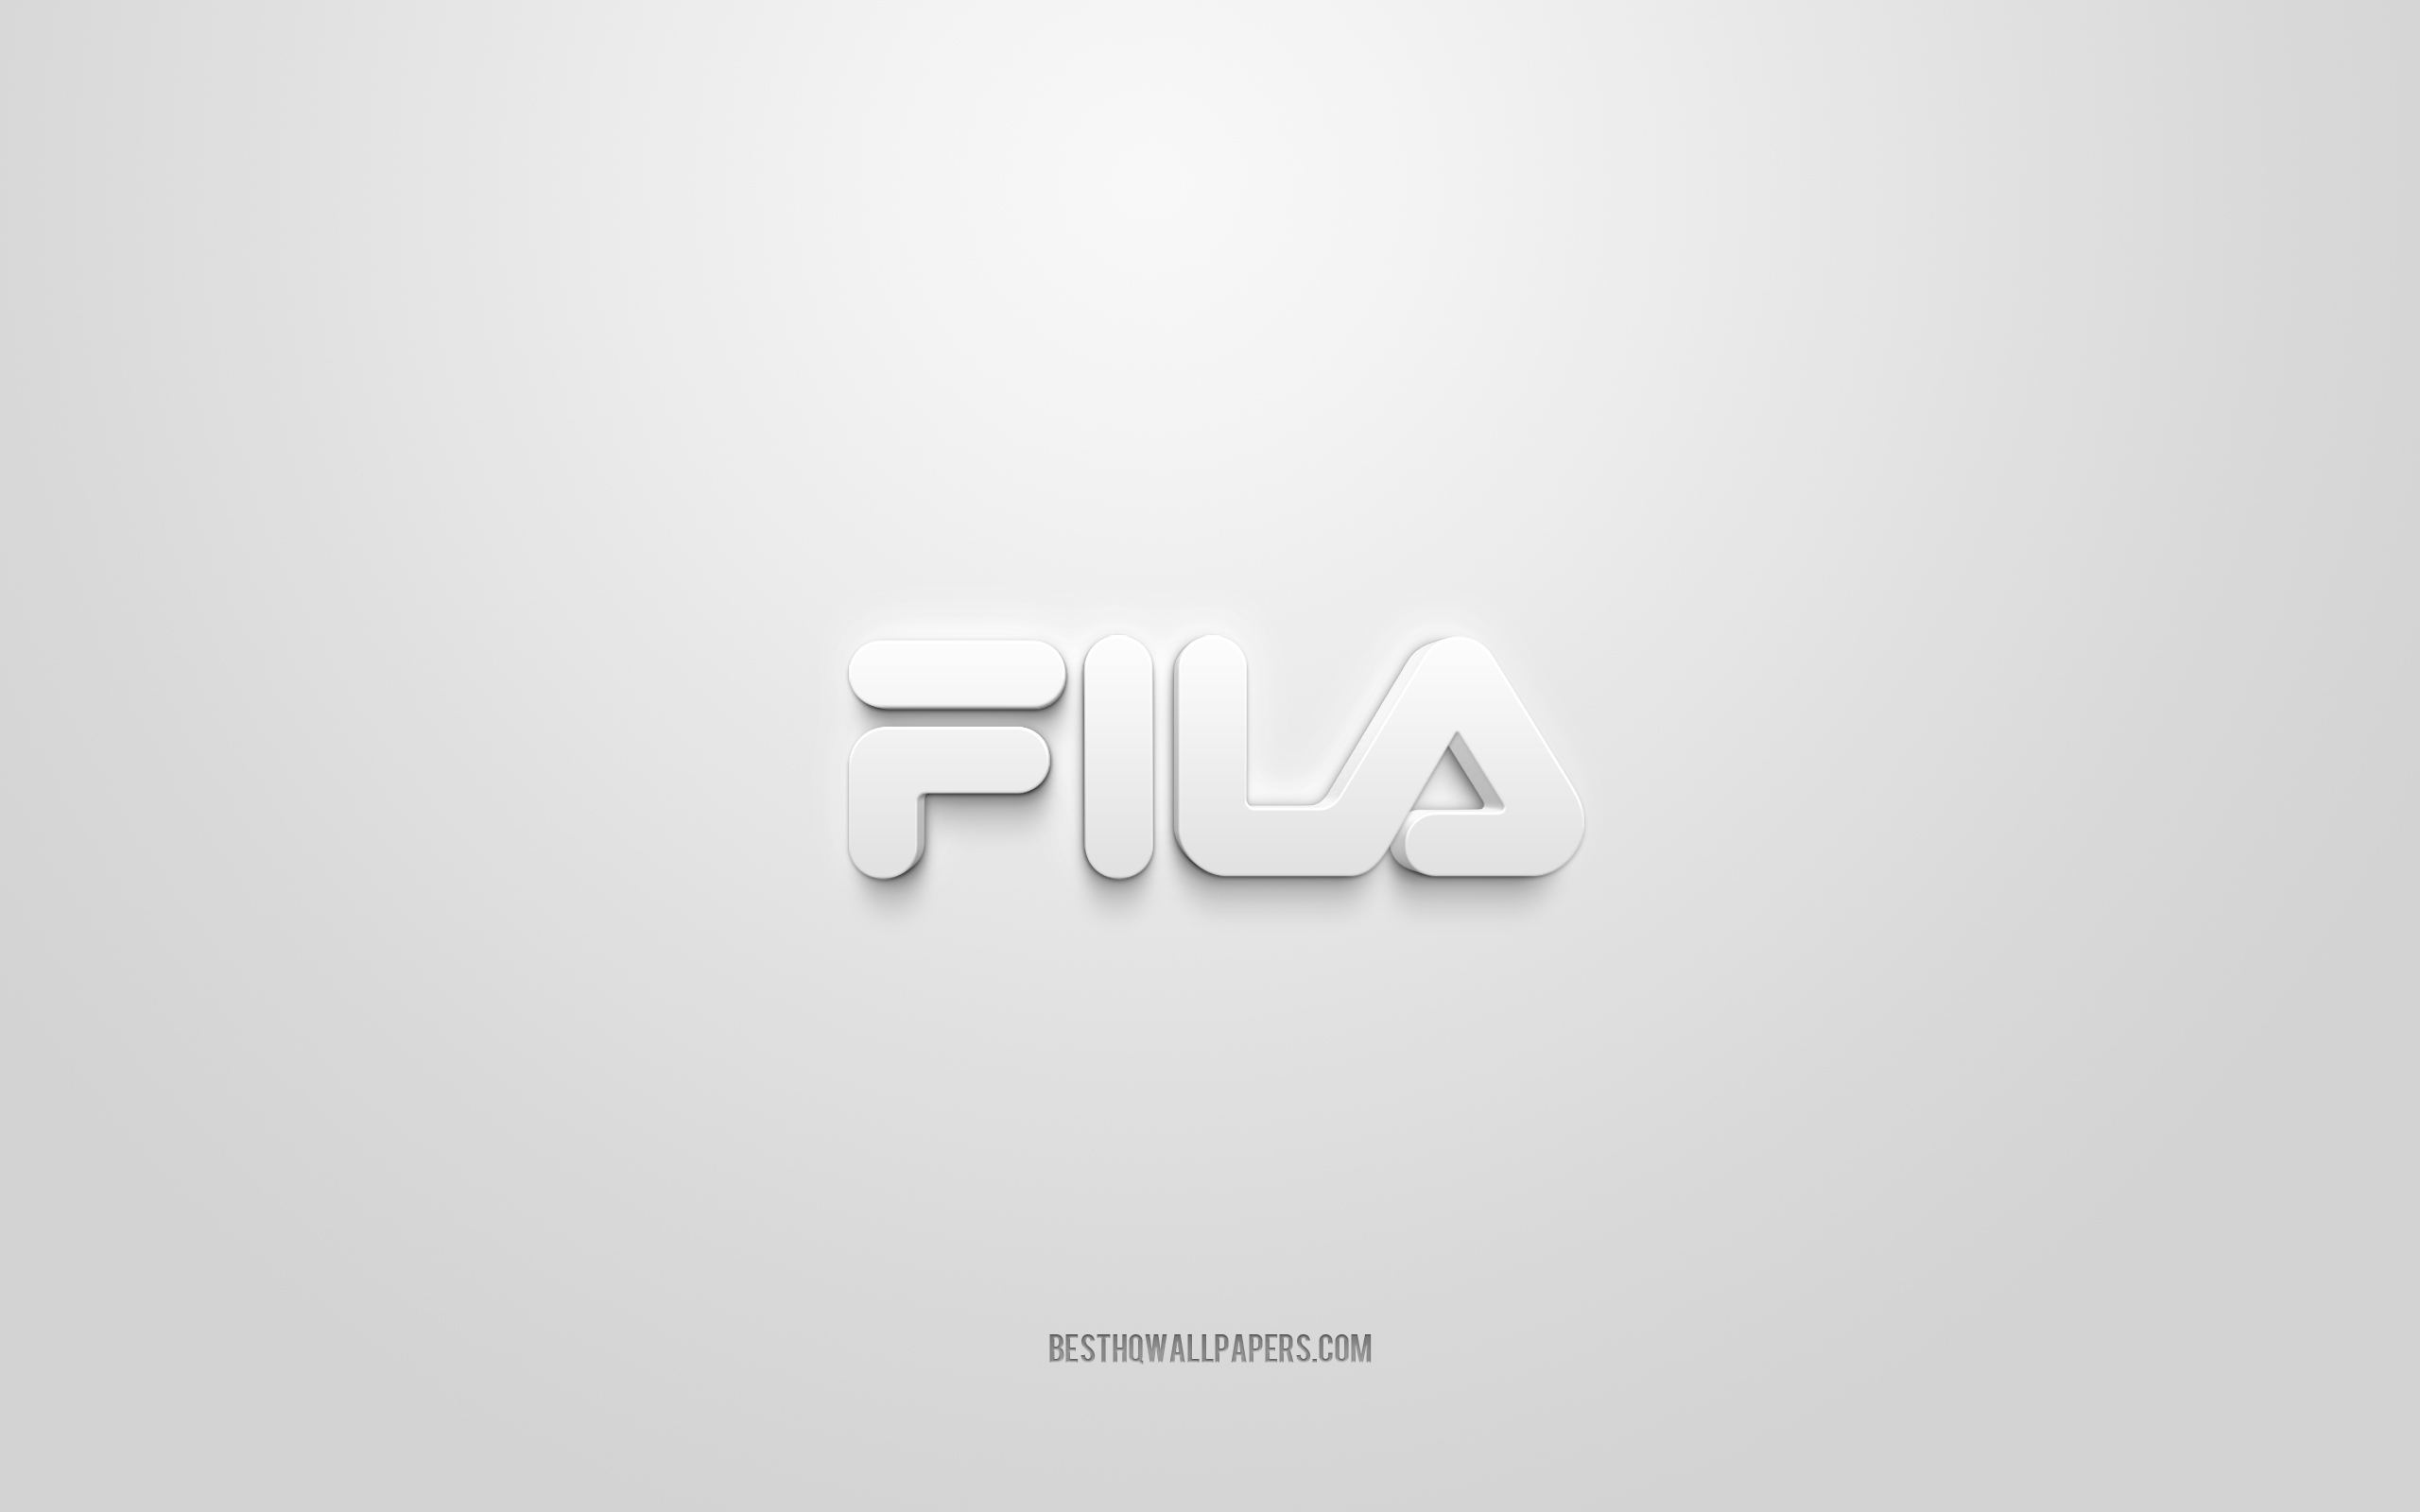 Download wallpaper Fila logo, white background, Fila 3D logo, 3D art, Fila, brands logo, white 3D Fila logo for desktop with resolution 2560x1600. High Quality HD picture wallpaper